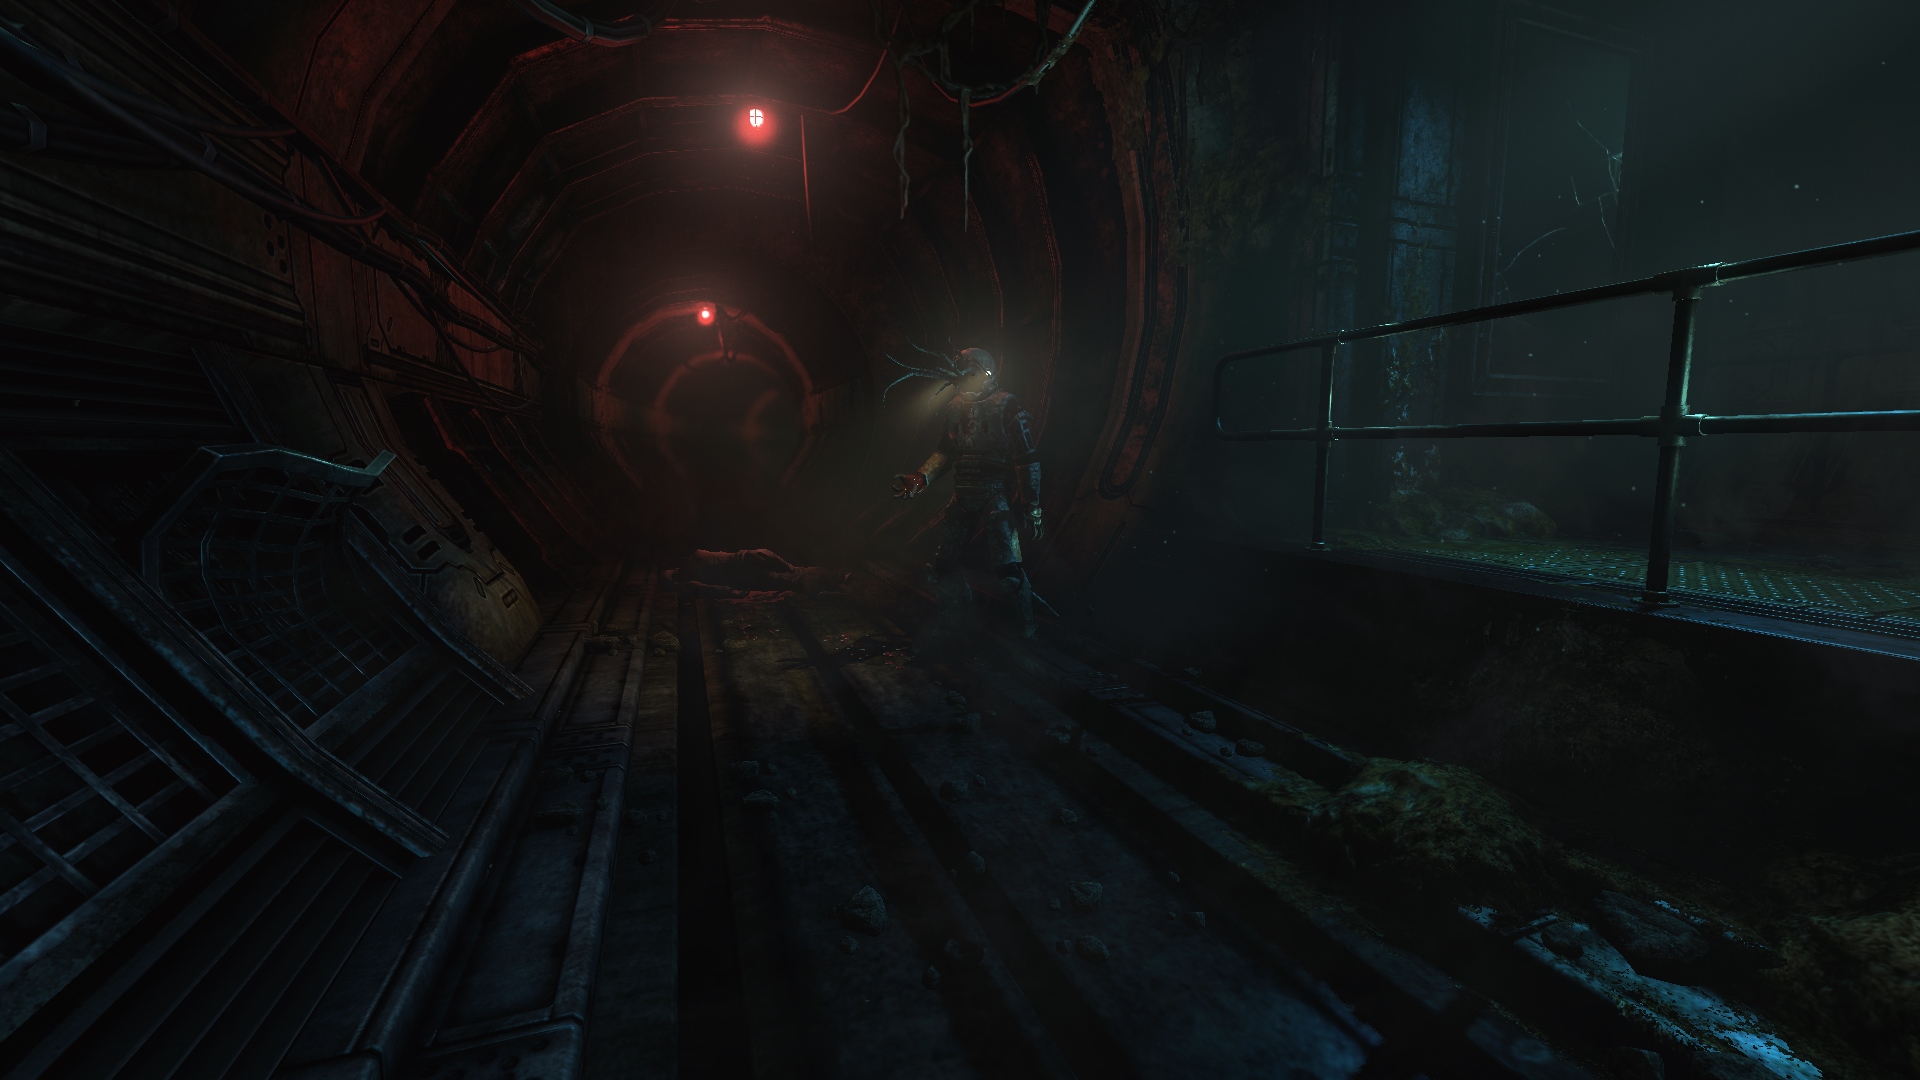 PS4 PC Horror Game SOMA Sells 92k Copies, Enough To Pay Bills For Two Years